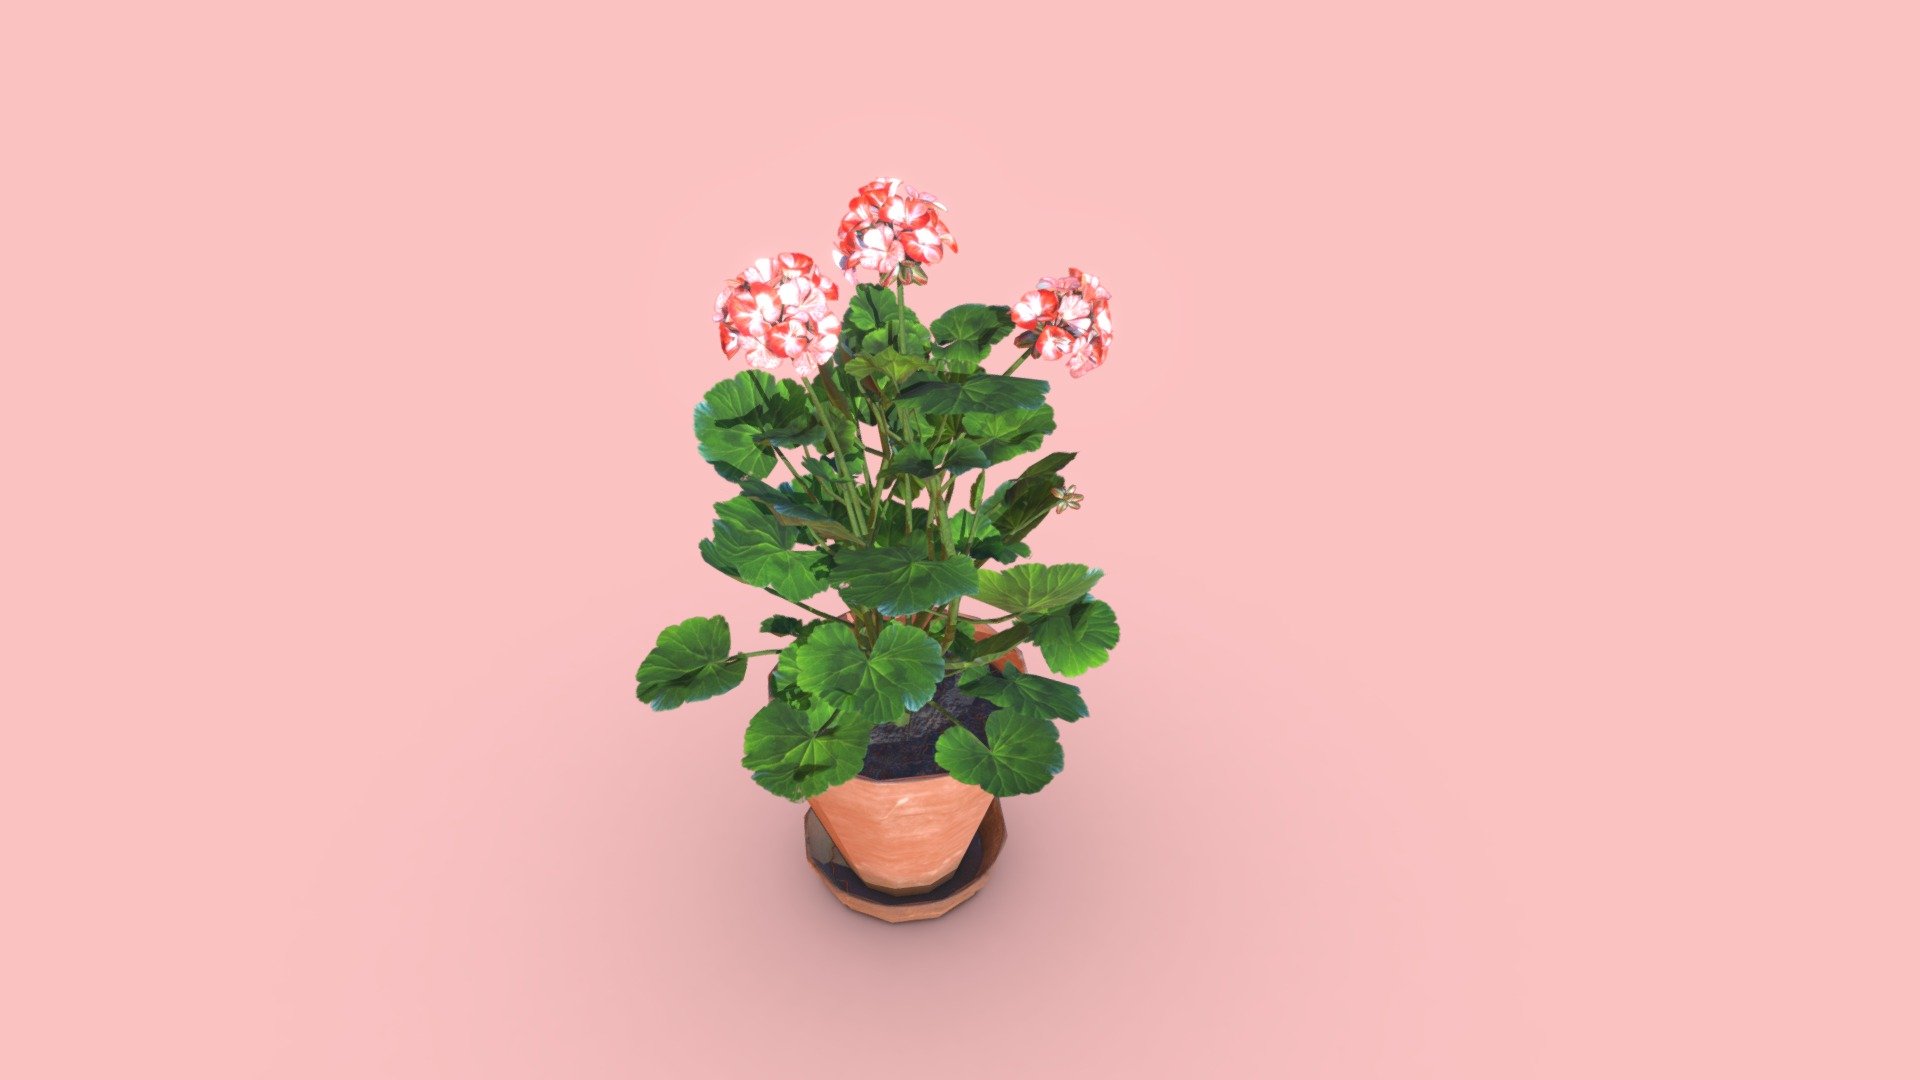 Geranium Flower




Model is Game-Ready/VR ready.

Model is UV mapped and unwrapped (mixed).

Asset is fully textured, 2048x2048 .png's. Textures for PBR MetalRough setup.

Model is ready for Unity and Unreal game engines.

File Formats:
.FBX

Additional zip file contains all the files 3d model